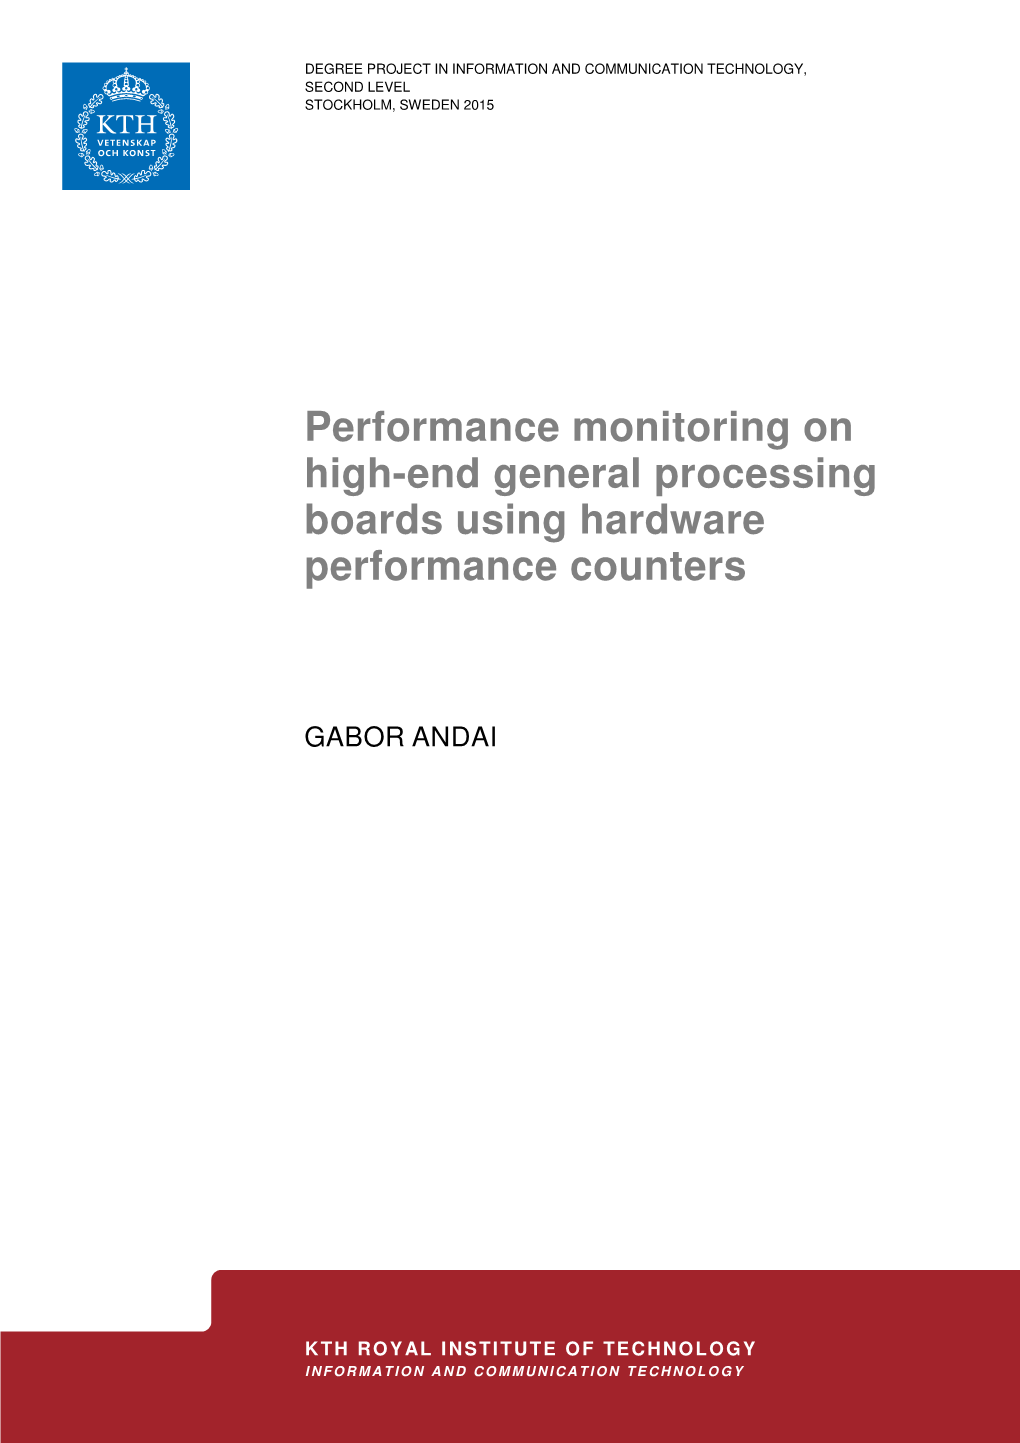 Performance Monitoring on High-End General Processing Boards Using Hardware Performance Counters